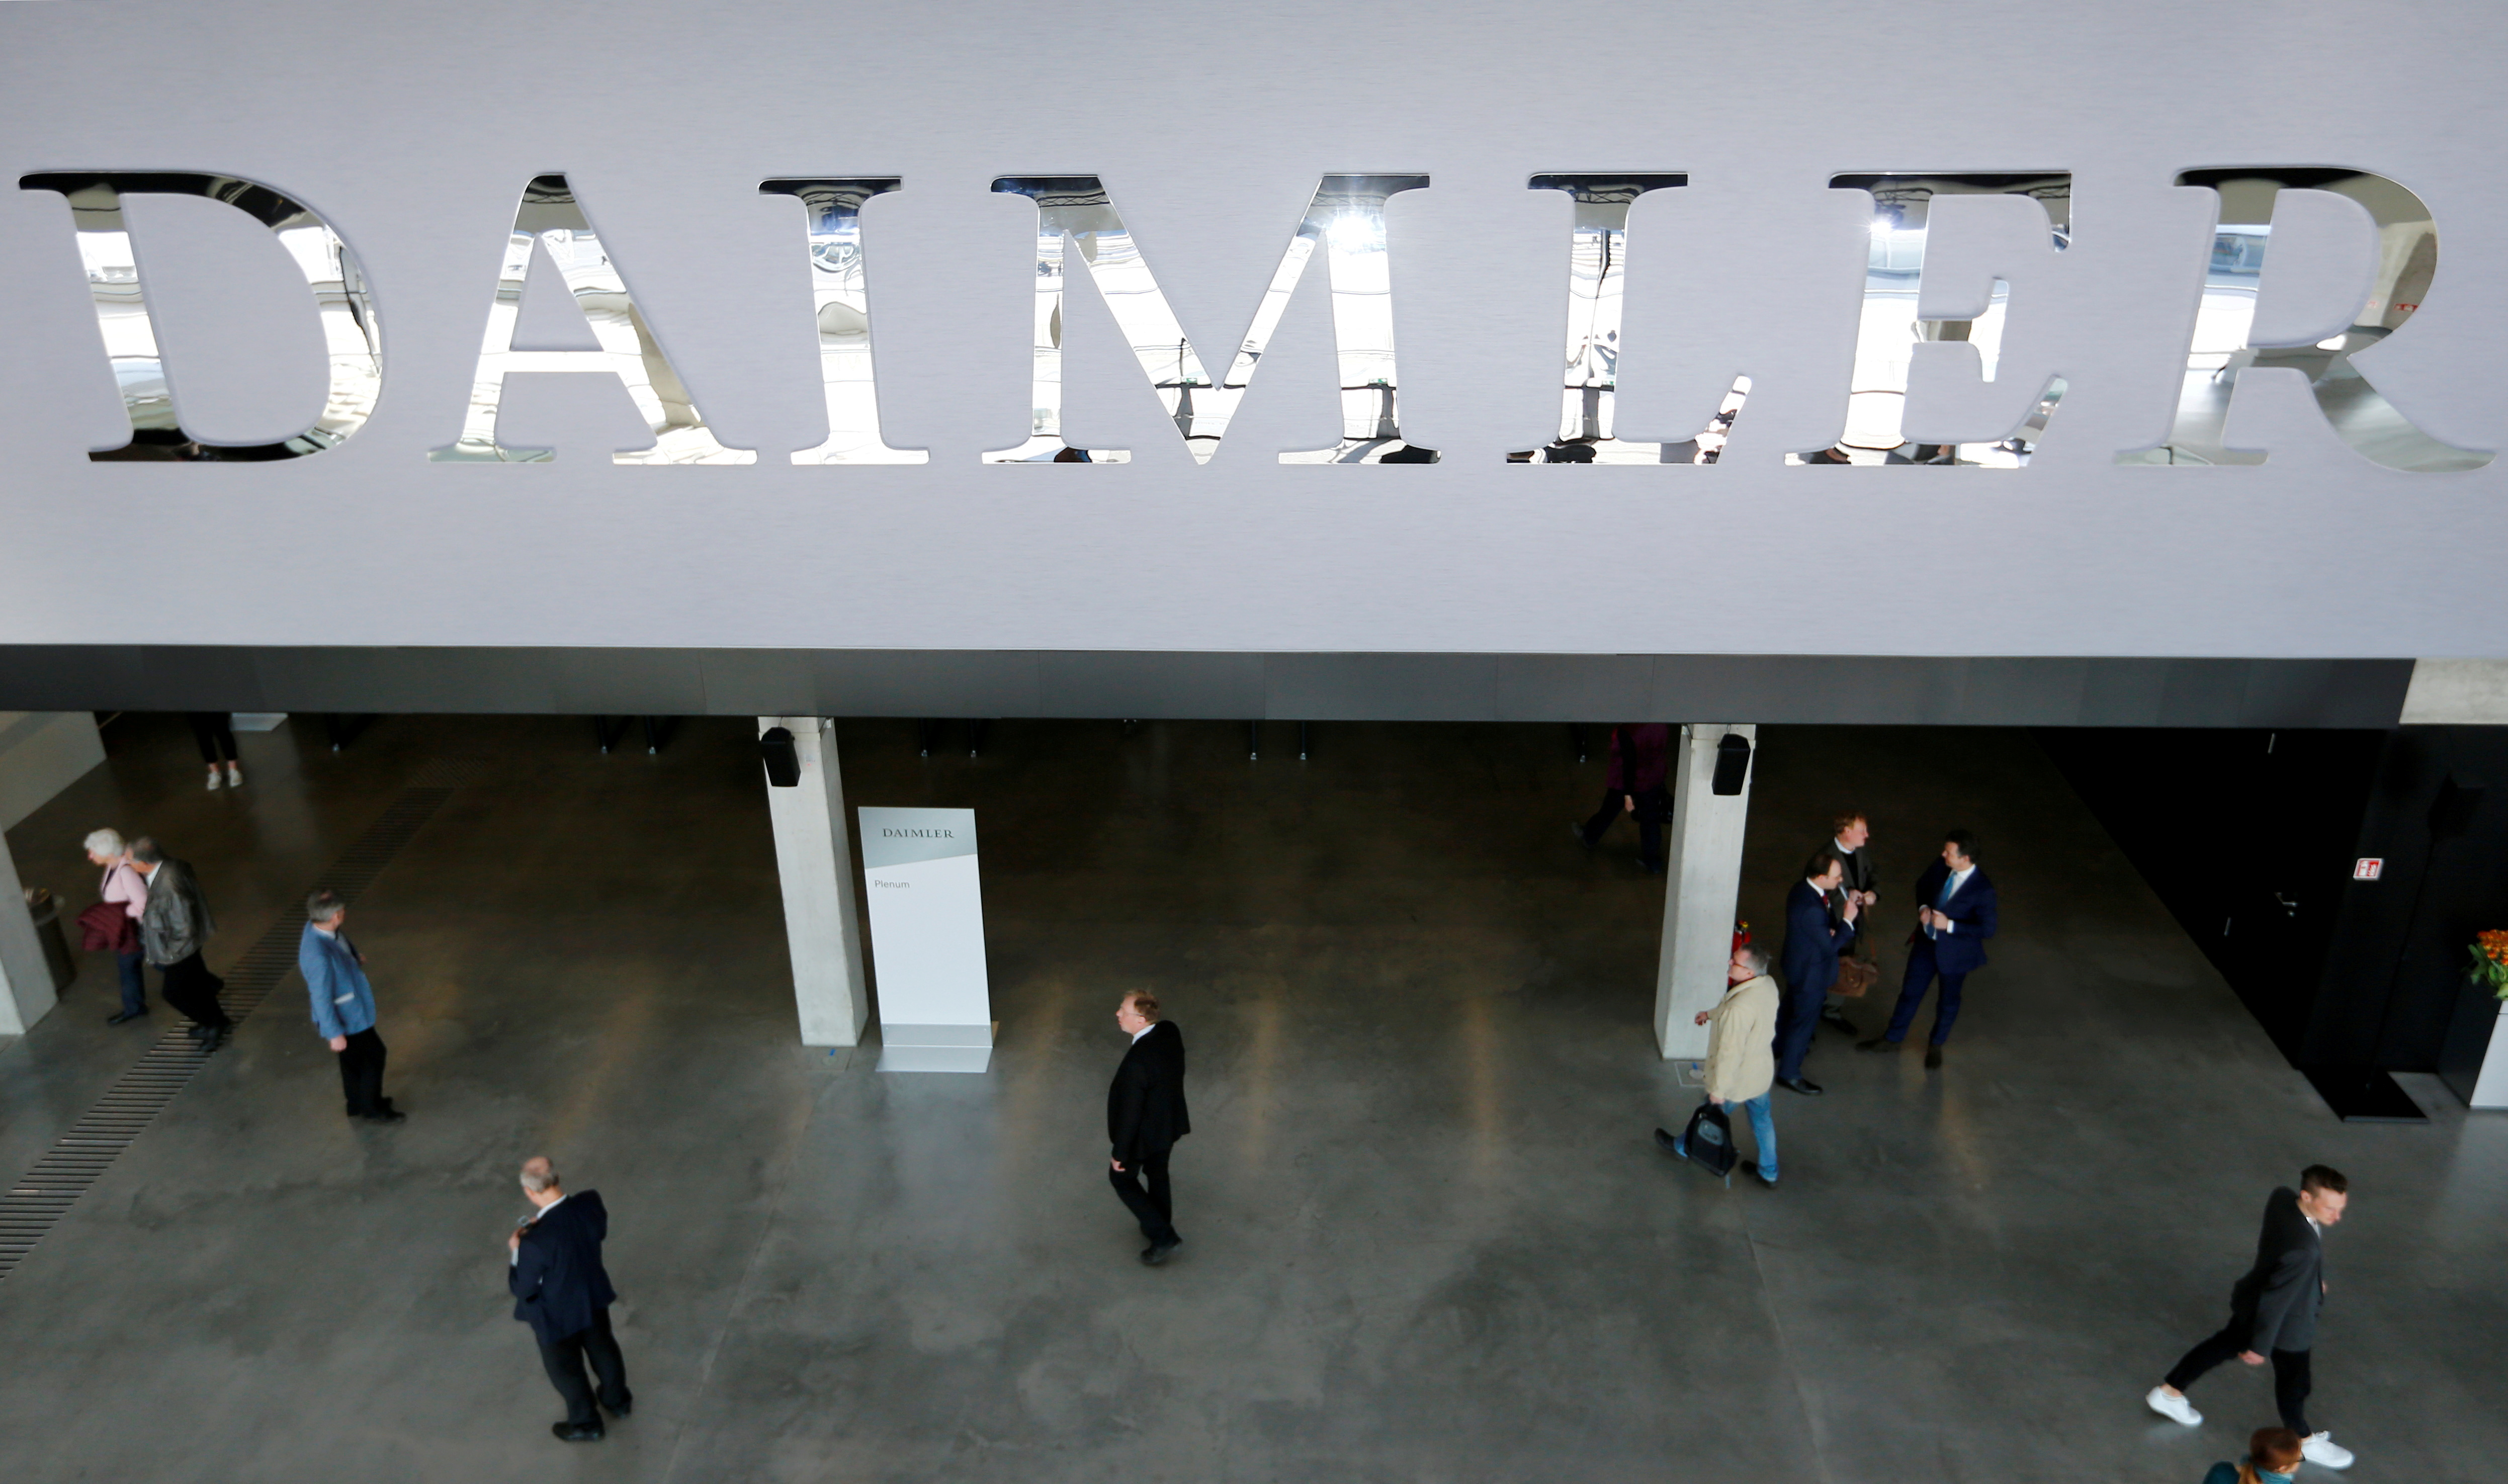 The Daimler logo is seen before the Daimler annual shareholder meeting in Berlin, Germany, April 5, 2018. REUTERS/Hannibal Hanschke//File Photo